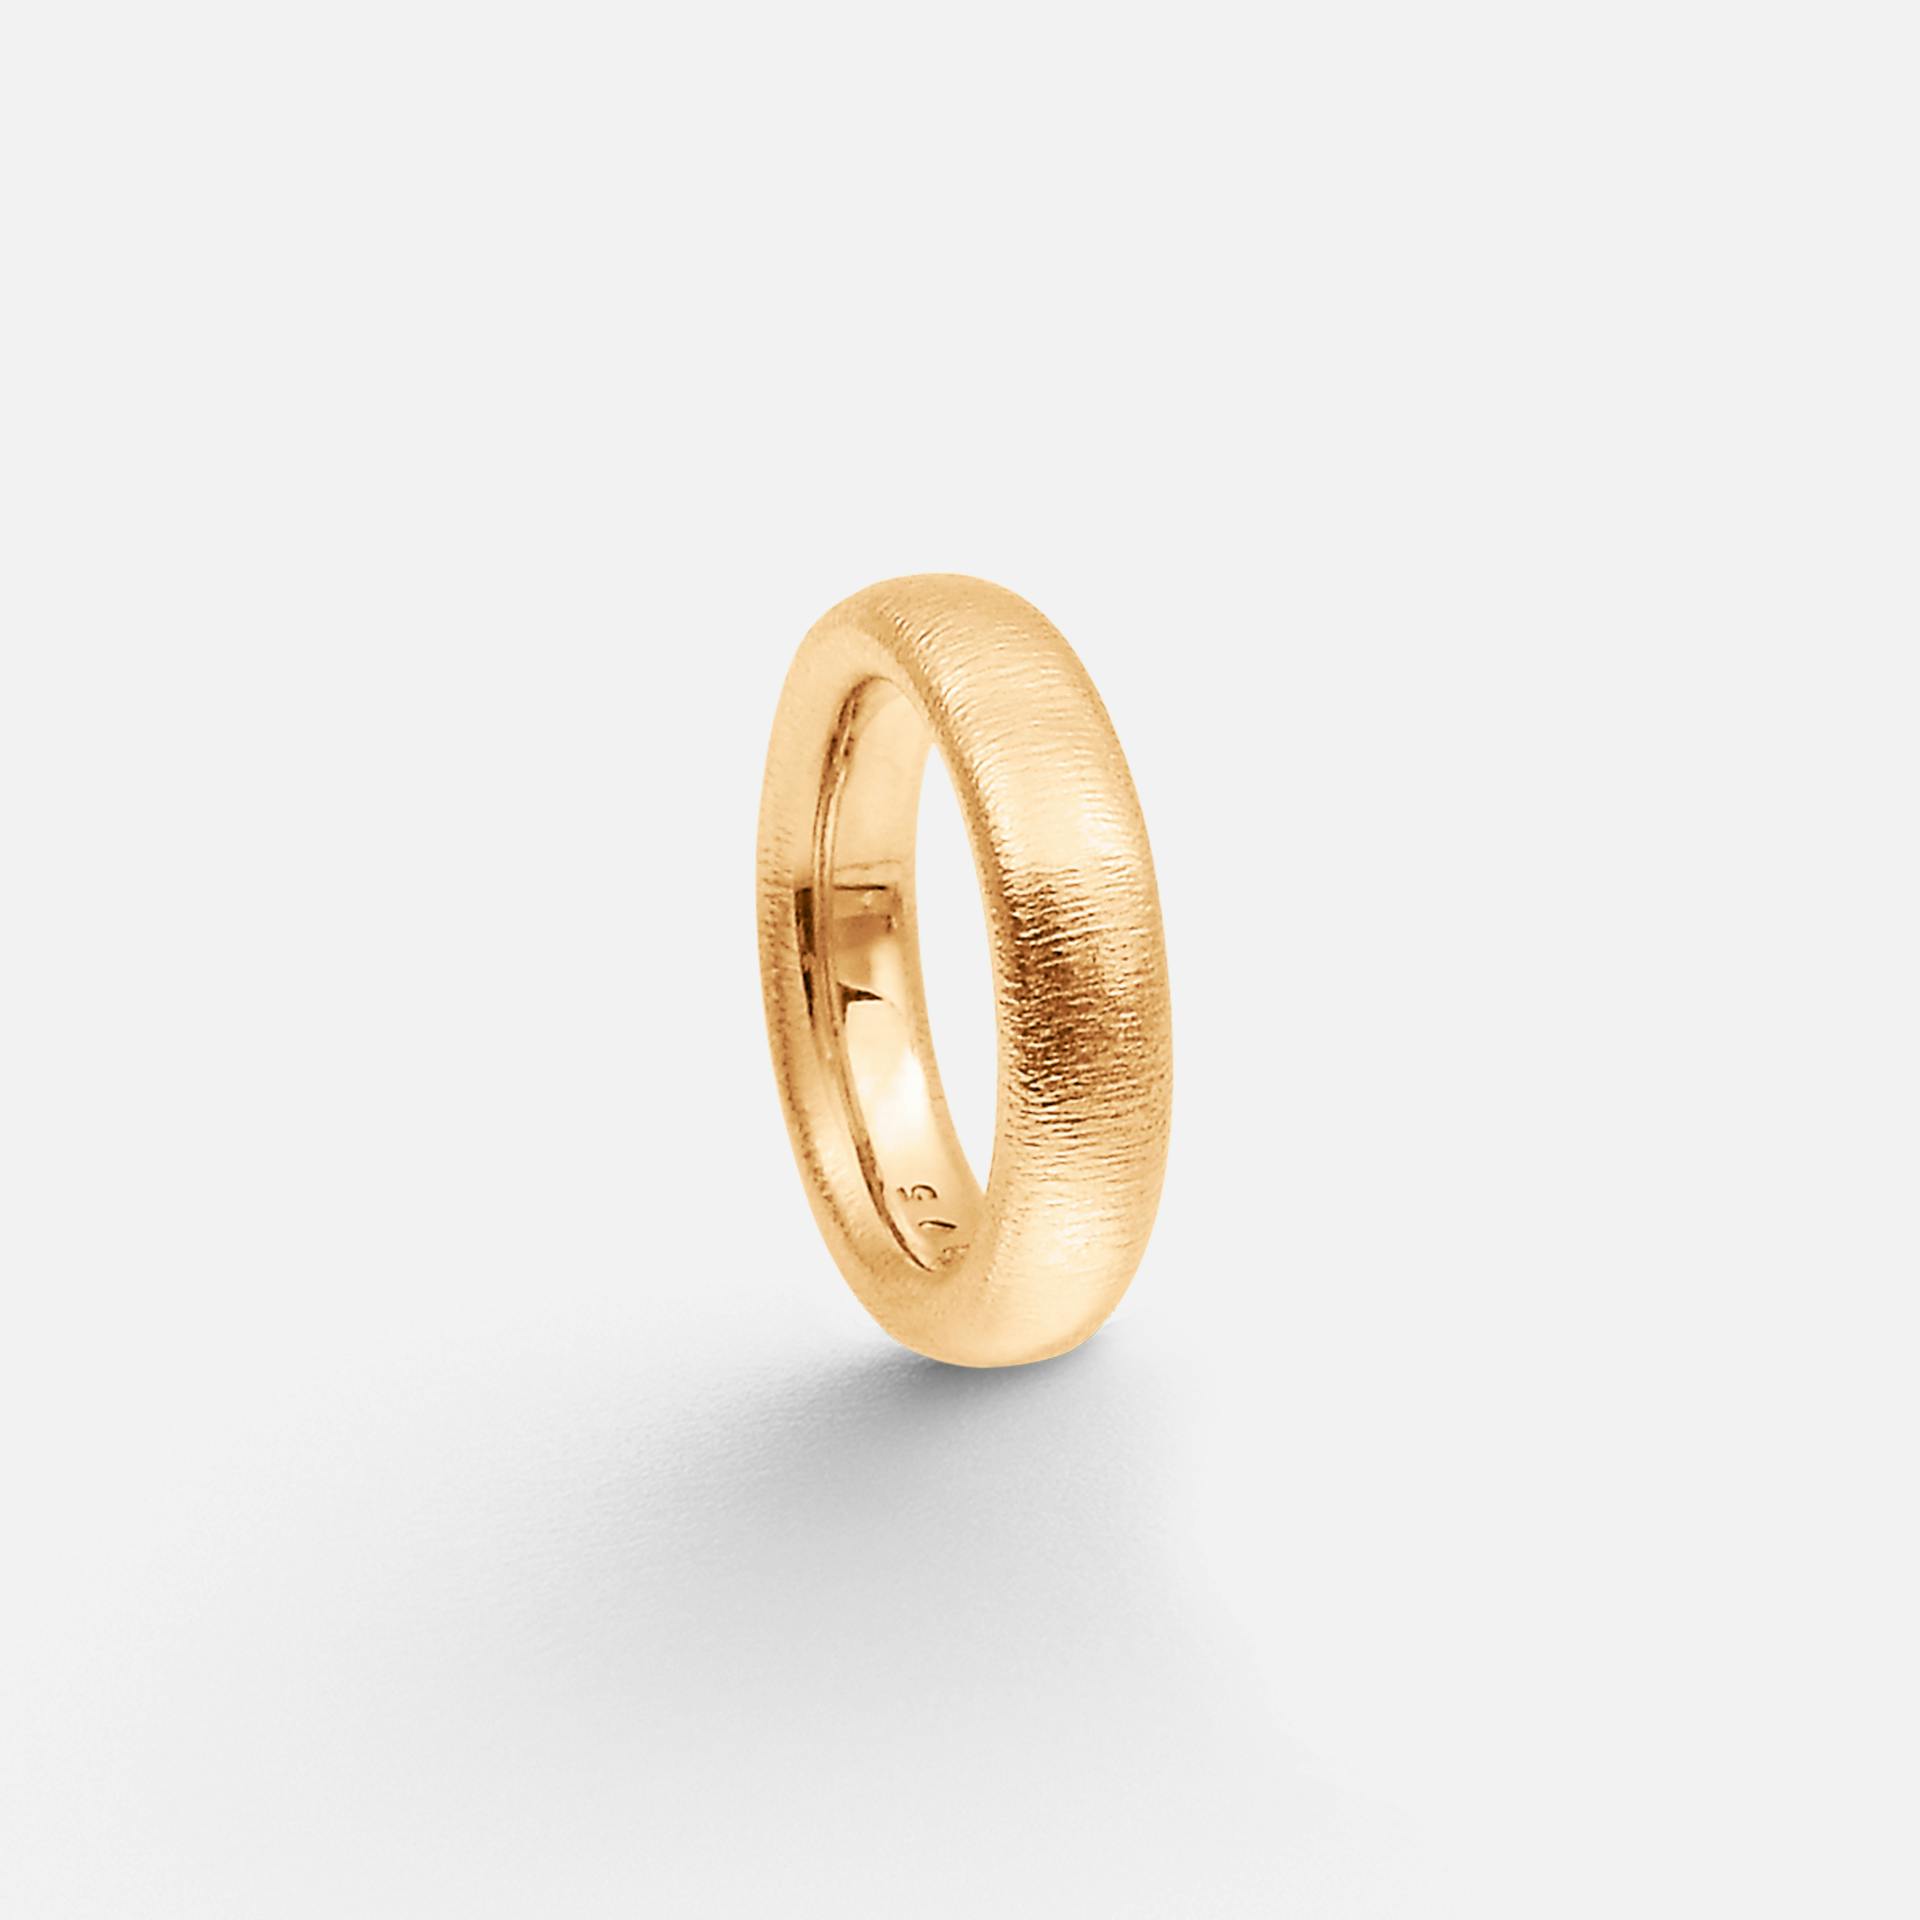 The Ring mens 5mm 18k textured gold